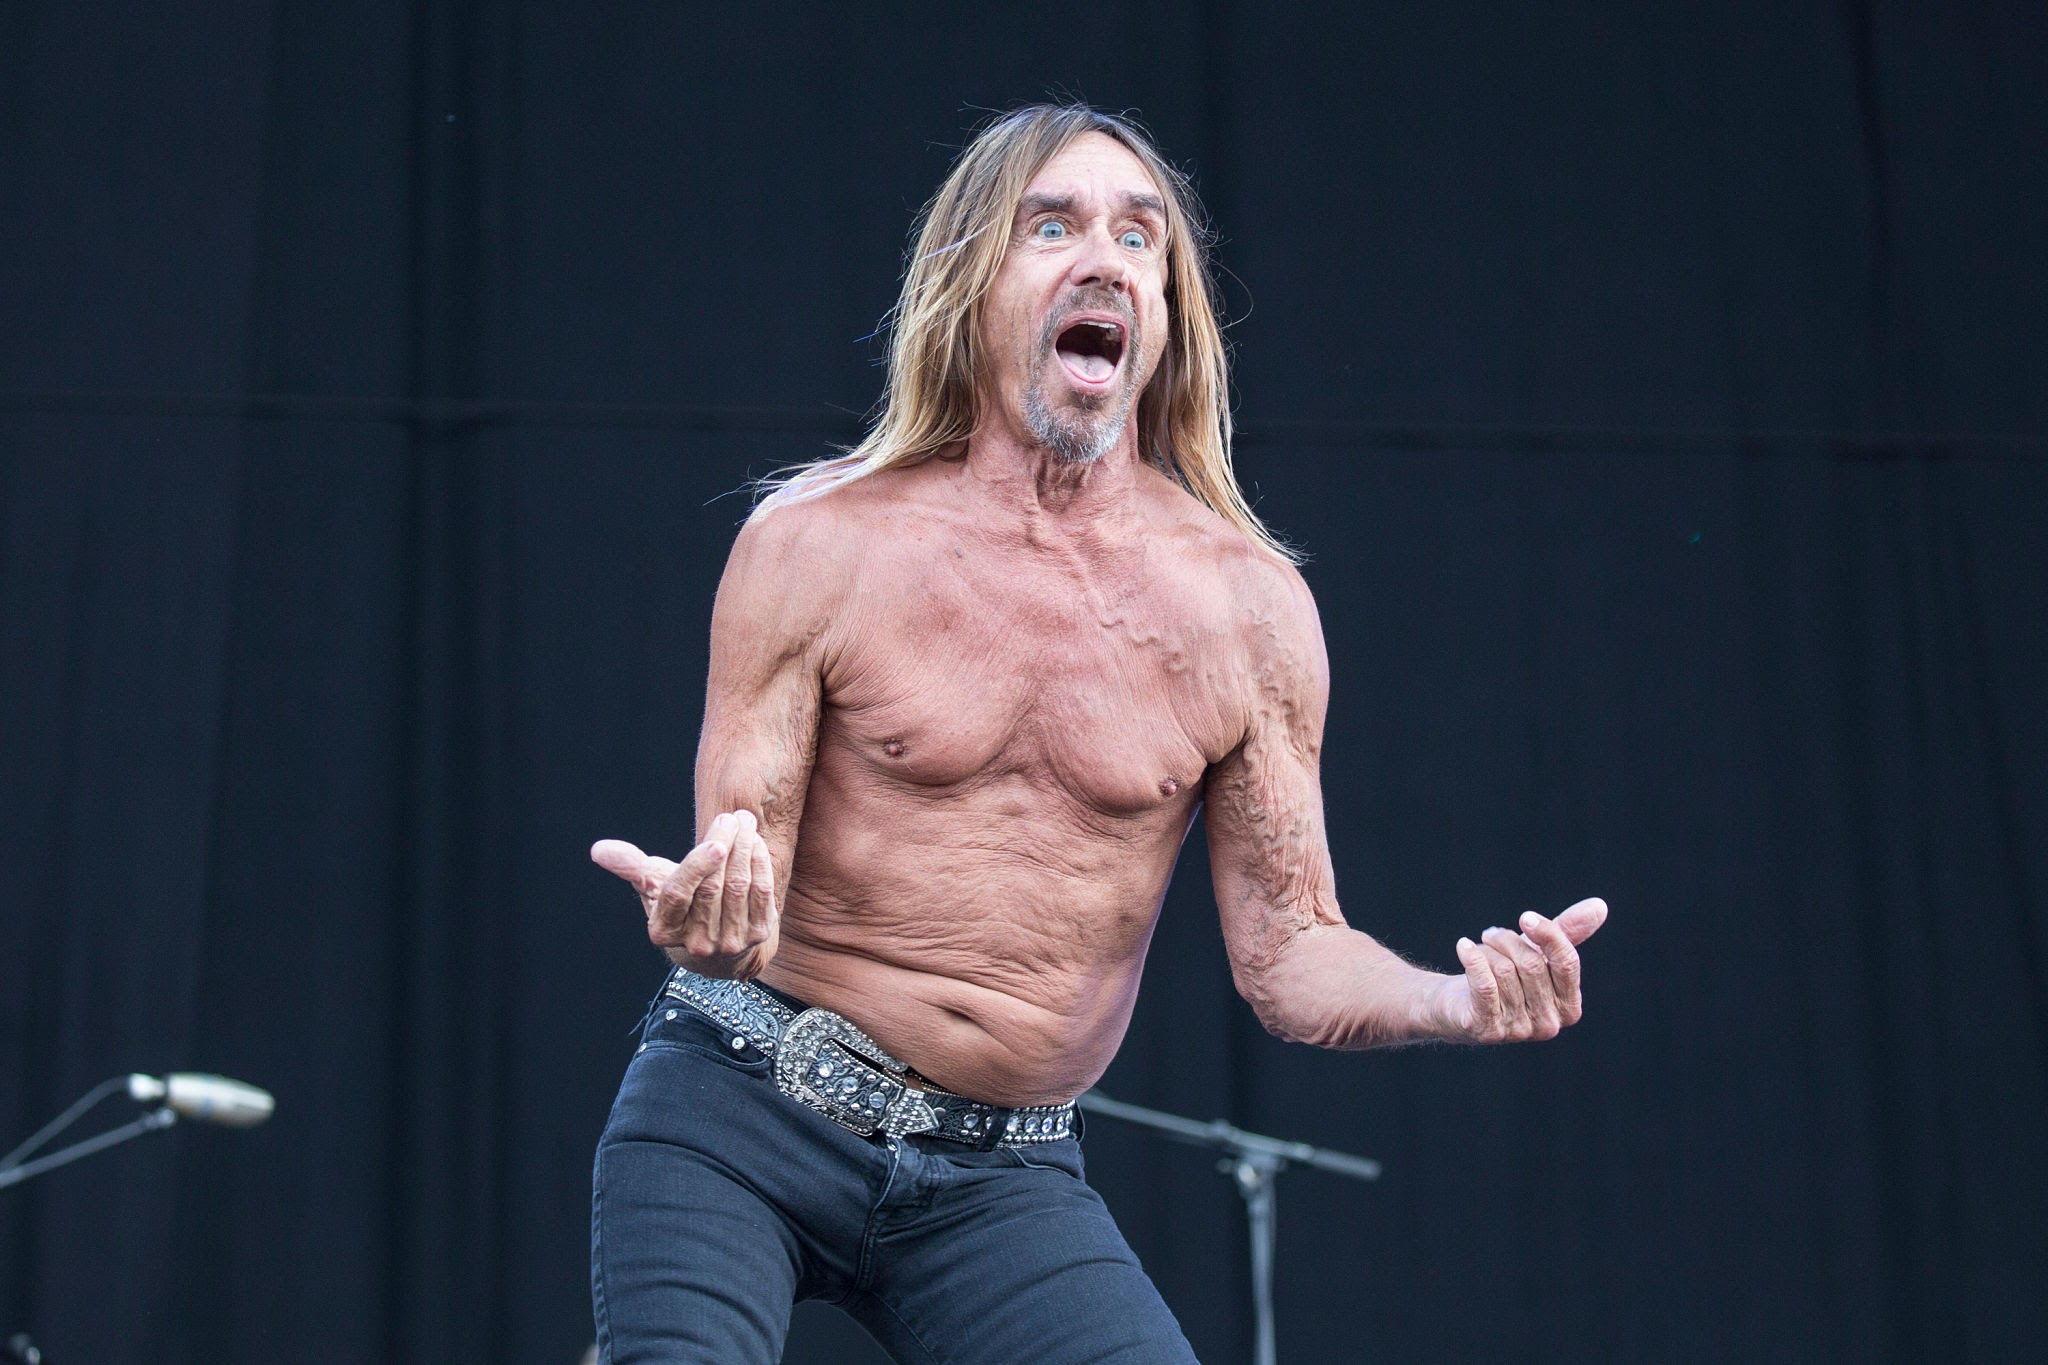 METAL INSIDER: Iggy Pop claims he was once approached to join AC/DC